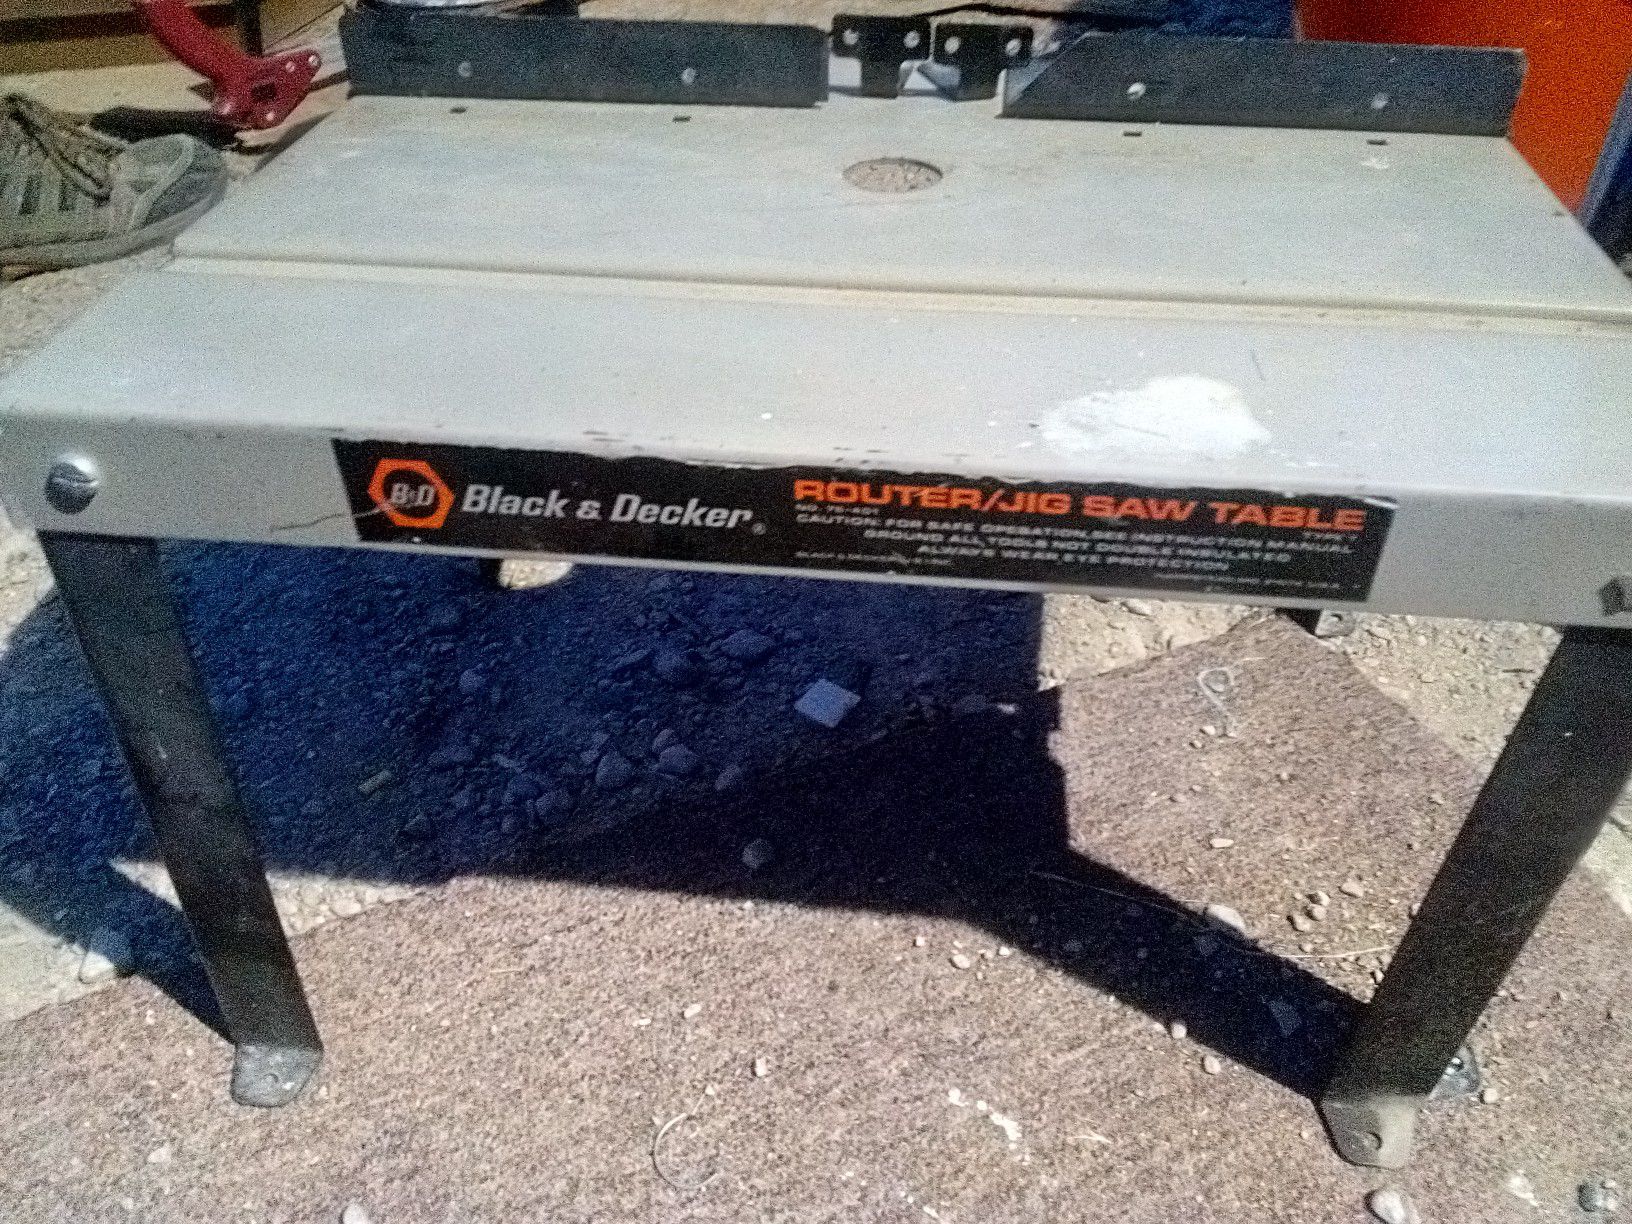 Black and Decker router and jig saw table